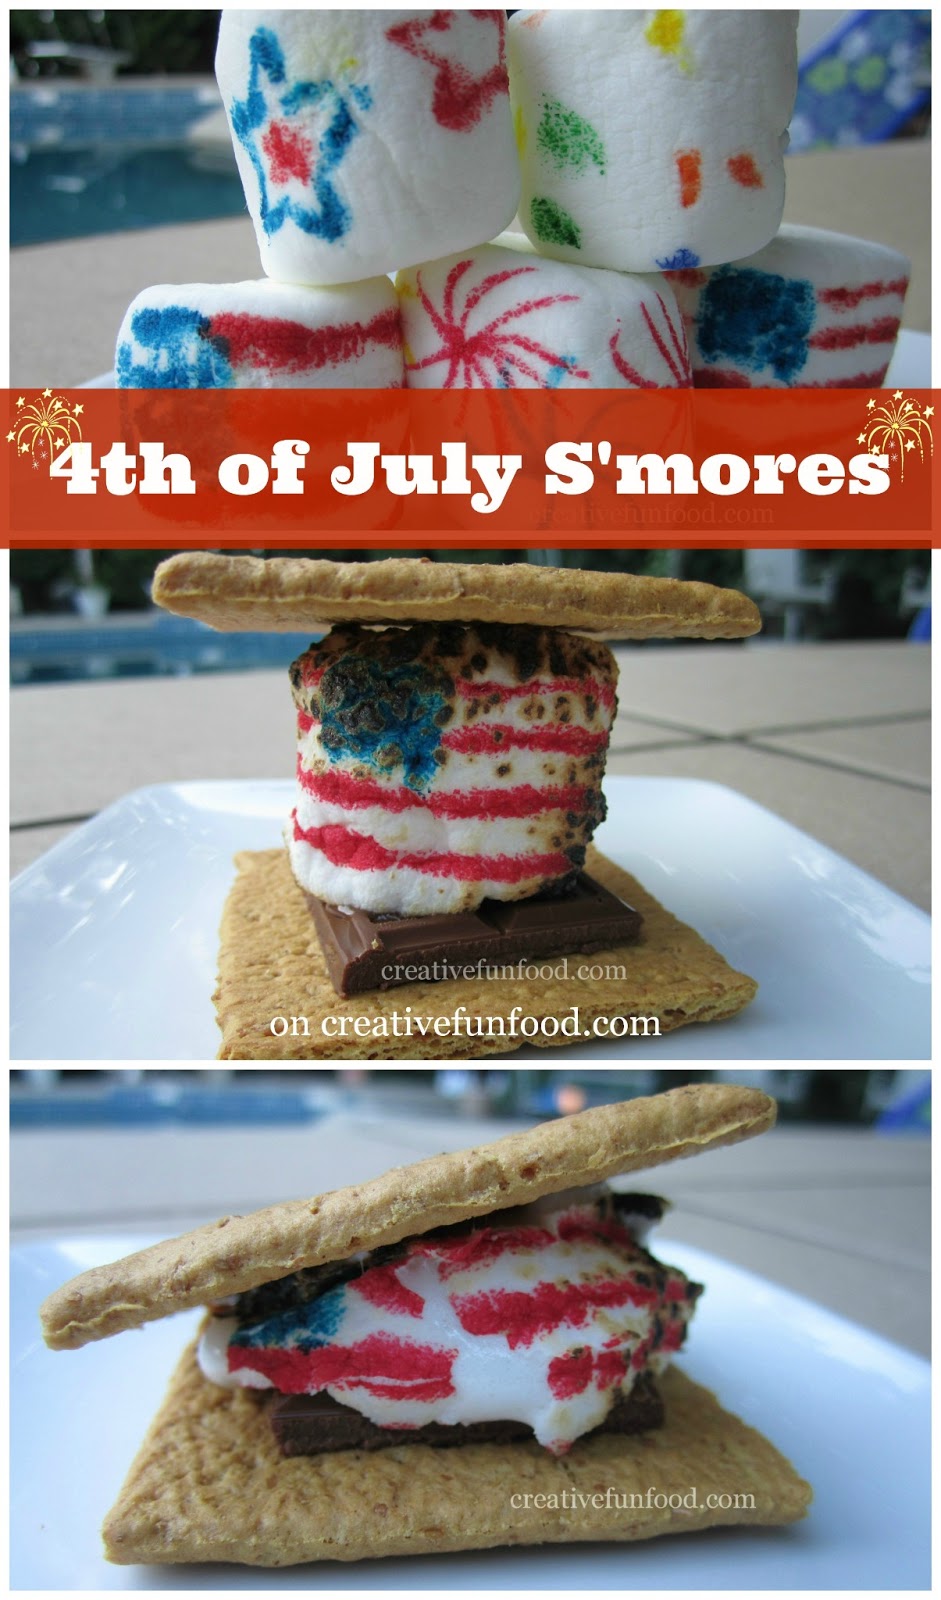 Creative Food: Fourth of July S'mores